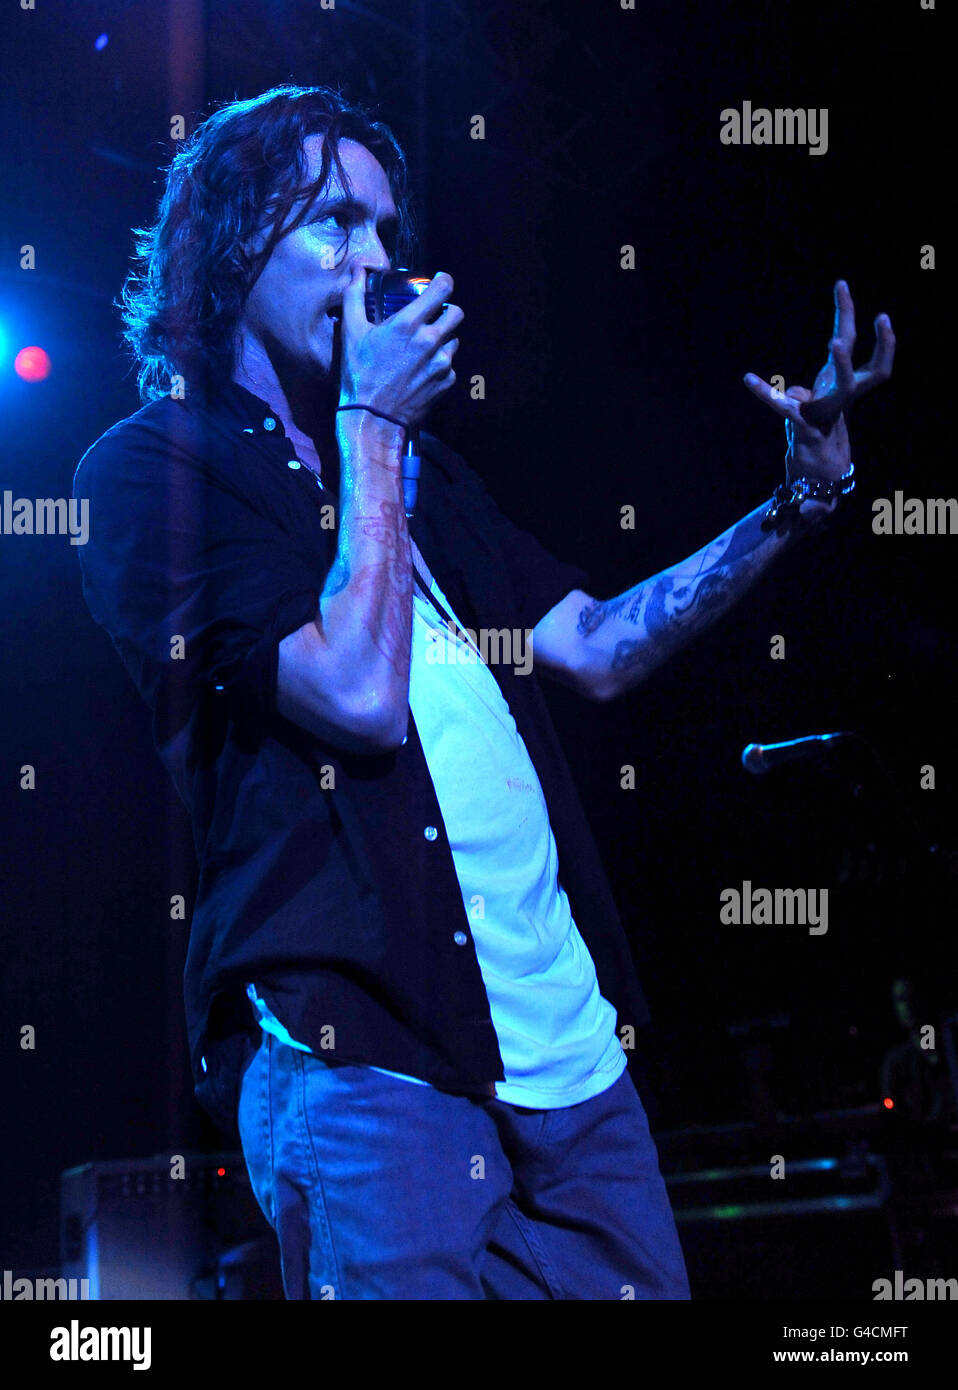 Brandon Boyd of Incubus performs on stage at the HMV Forum in north London. Stock Photo